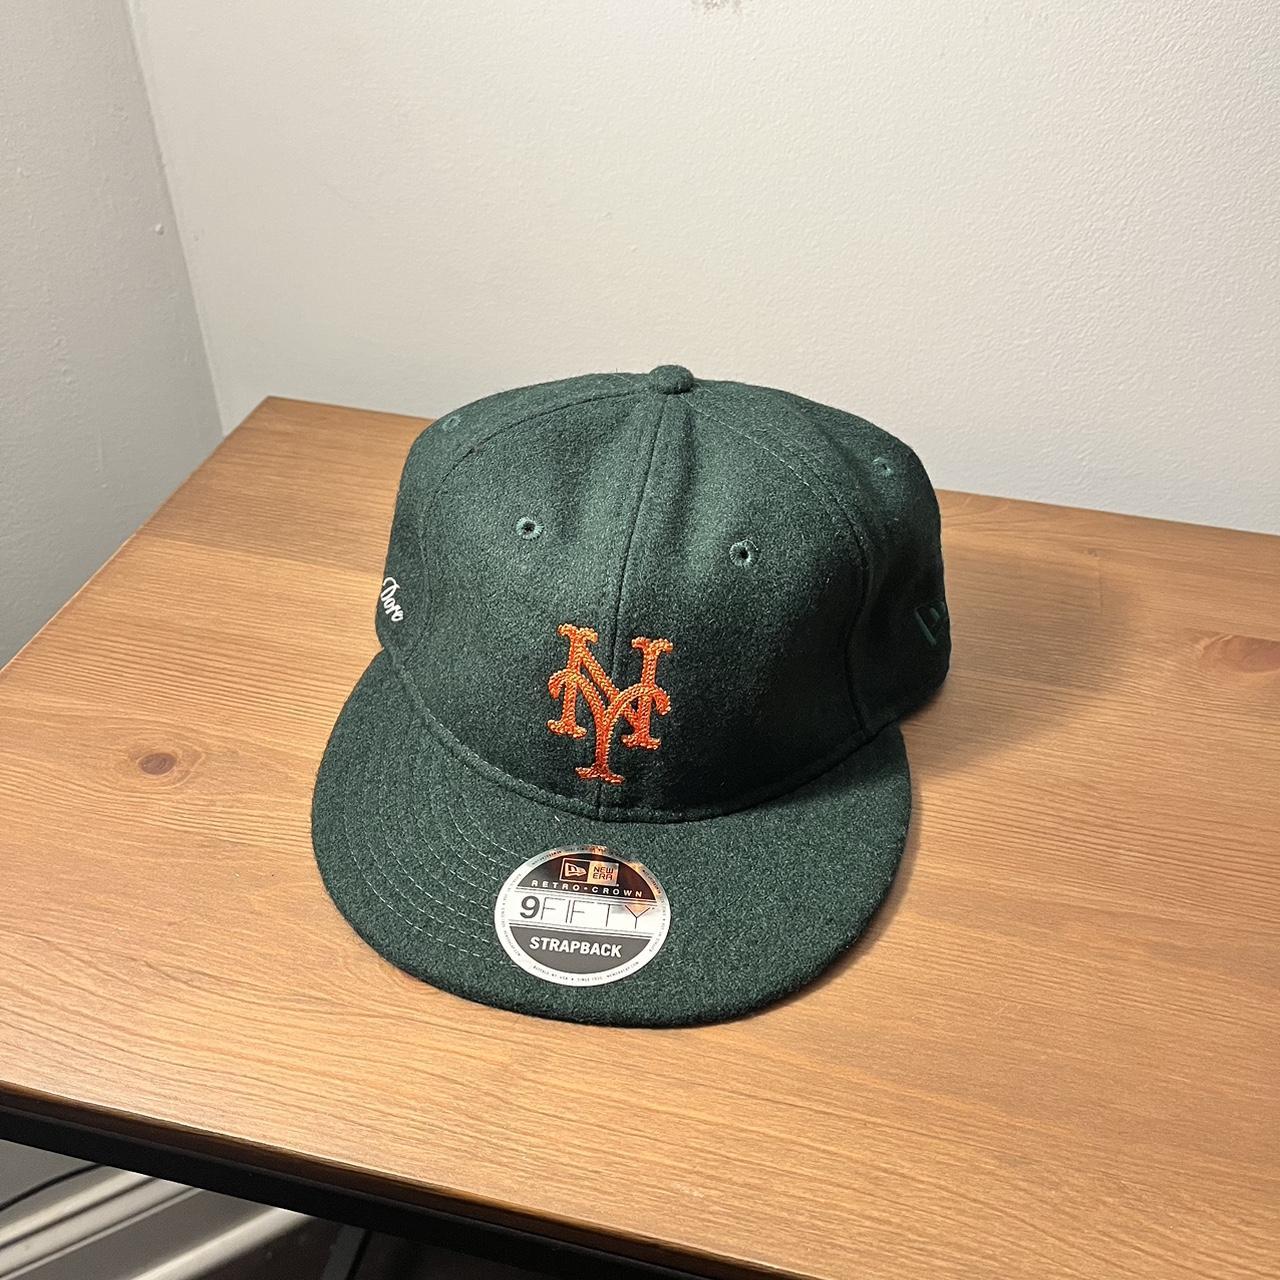 Aime Leon Dore New Era Wool Mets Hat, Brand new with...